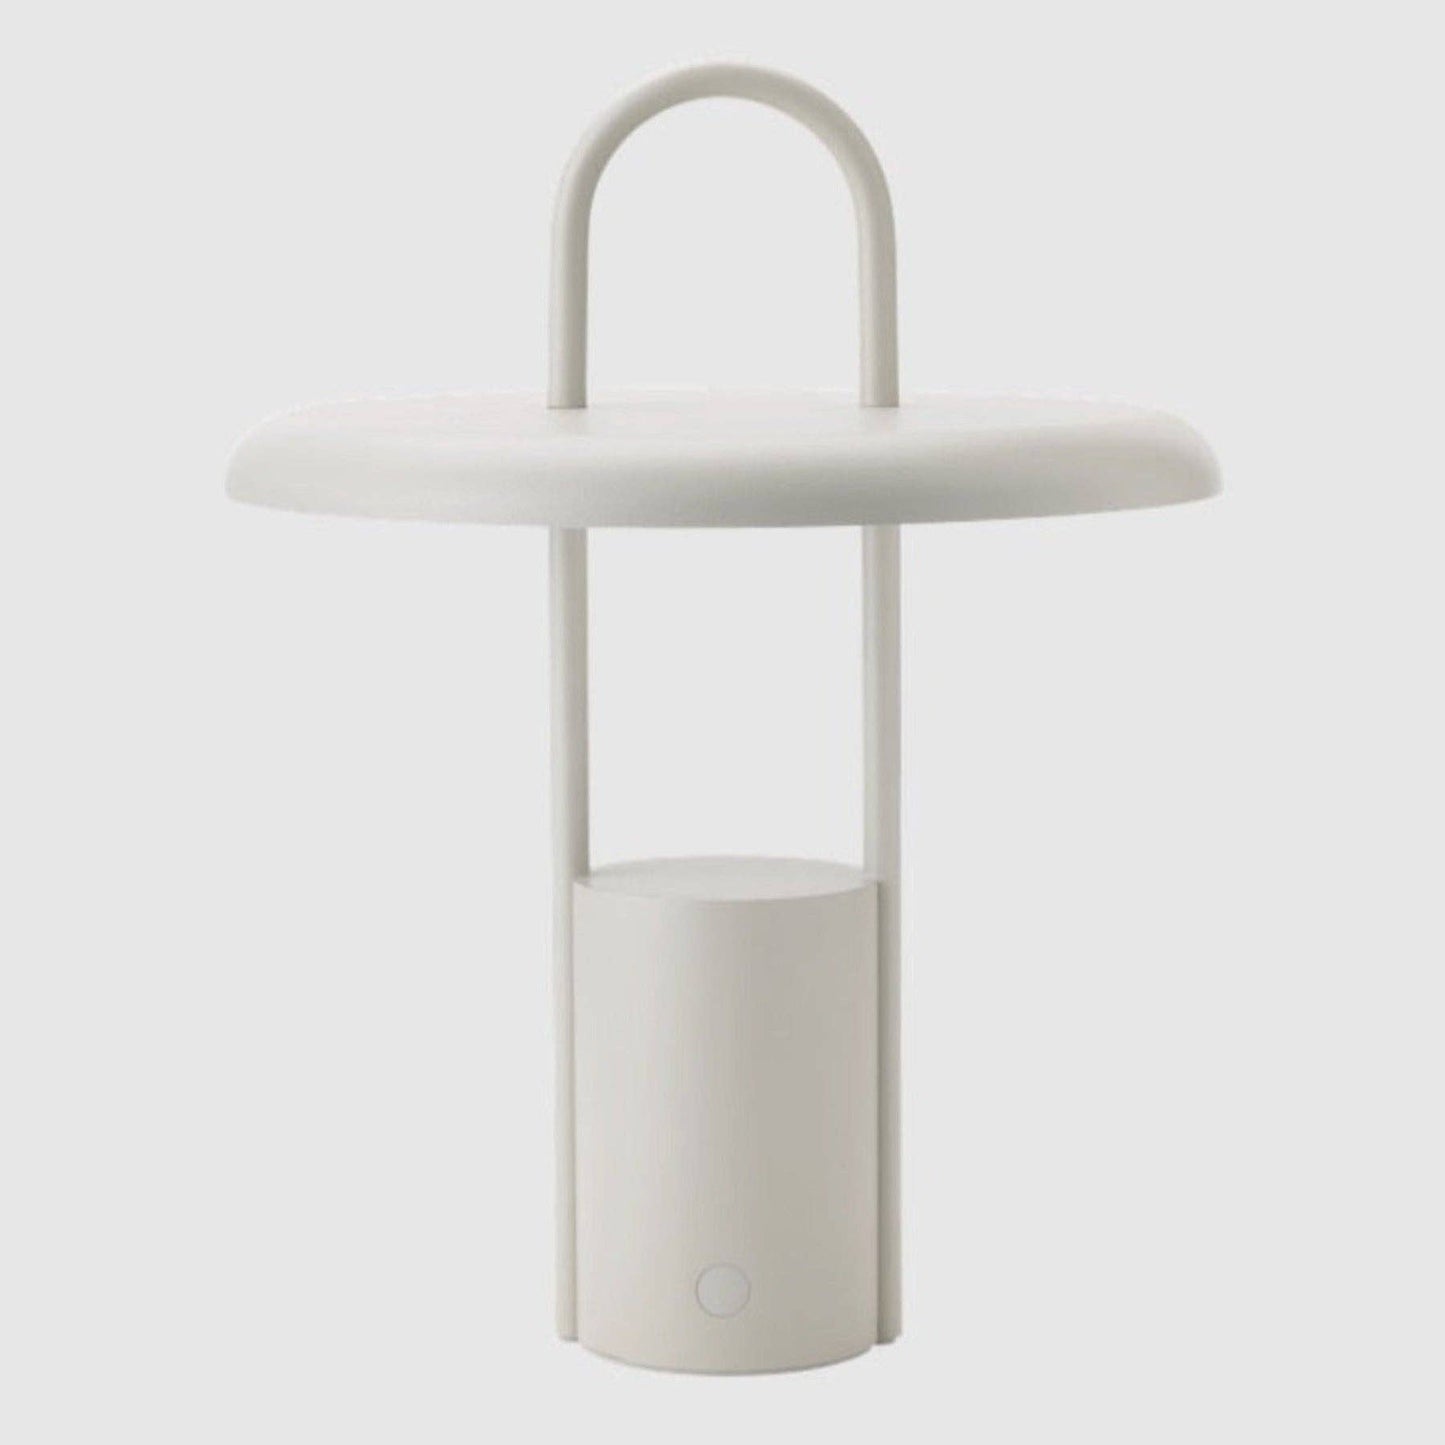 Pier LED lamp - sand (614-1) by Stelton - Curated Home Decor